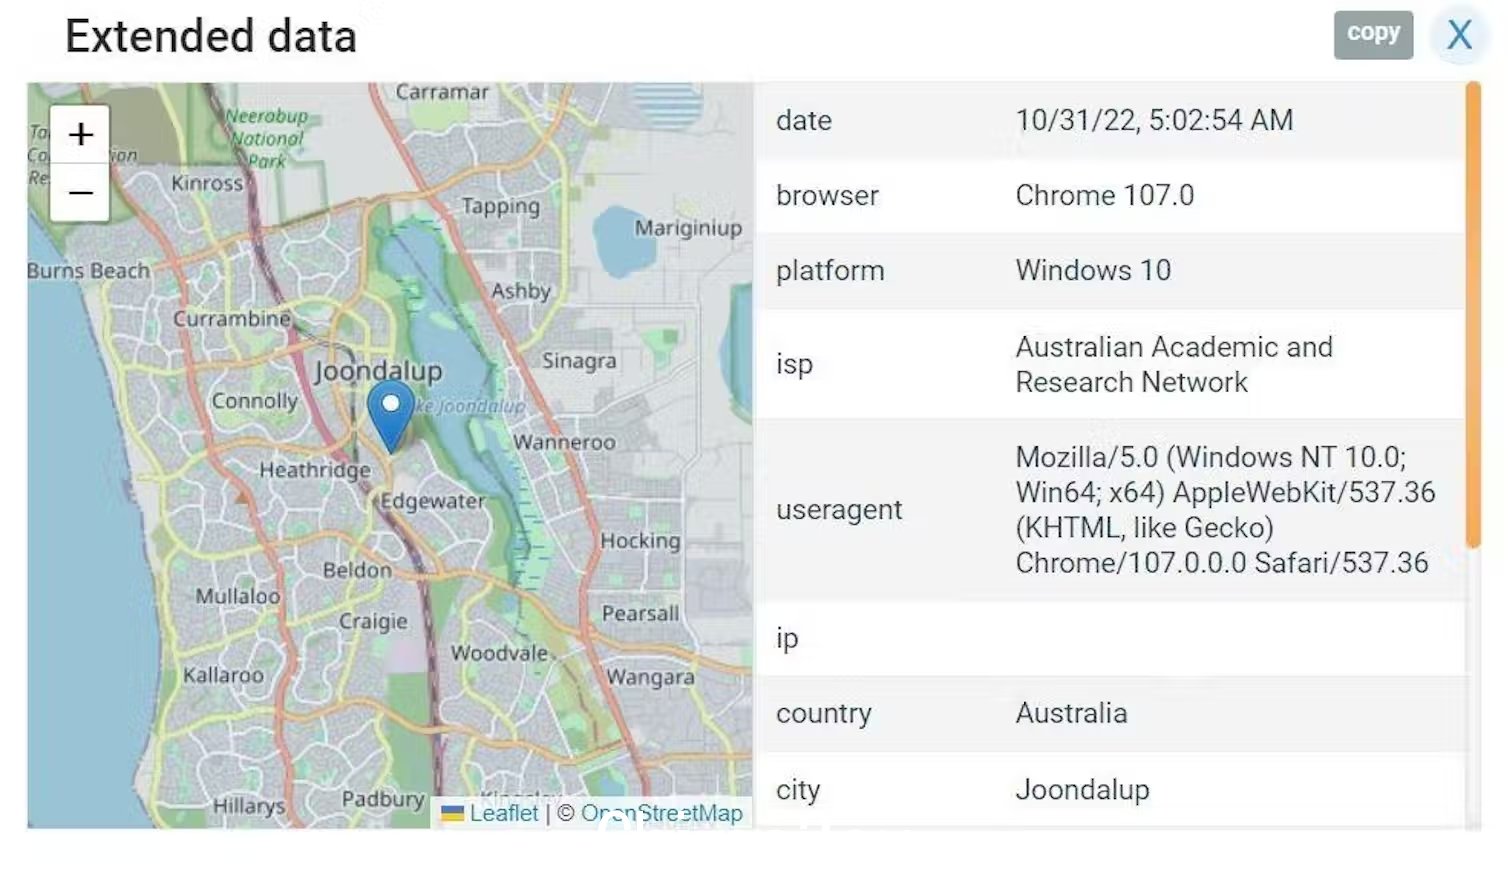 An image shows a pin dropped on a map of Perth, with IP data displayed to its right